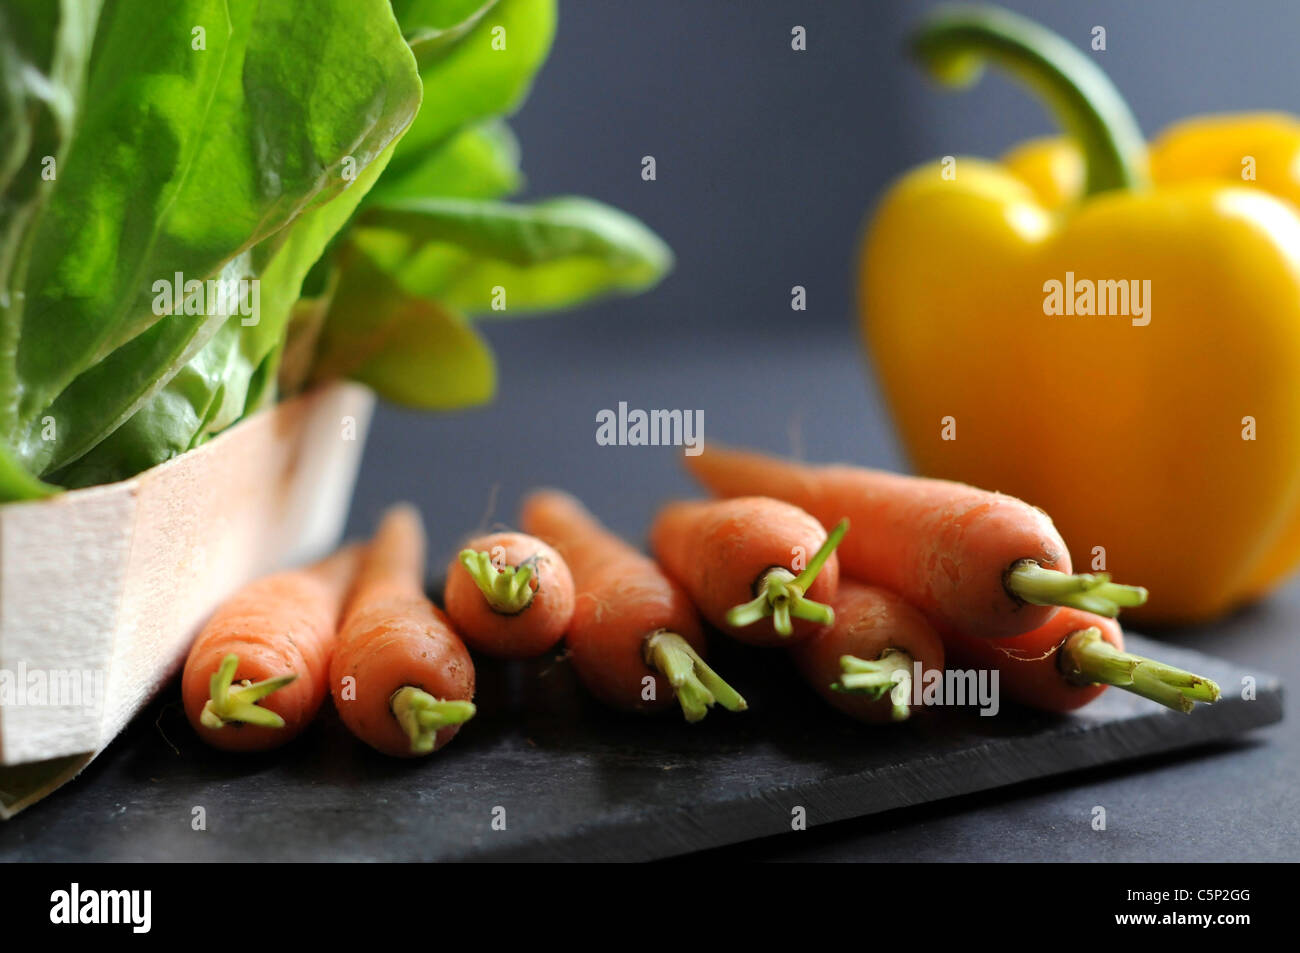 Carrots and one yellow sweet pepper bell with lettuce Stock Photo